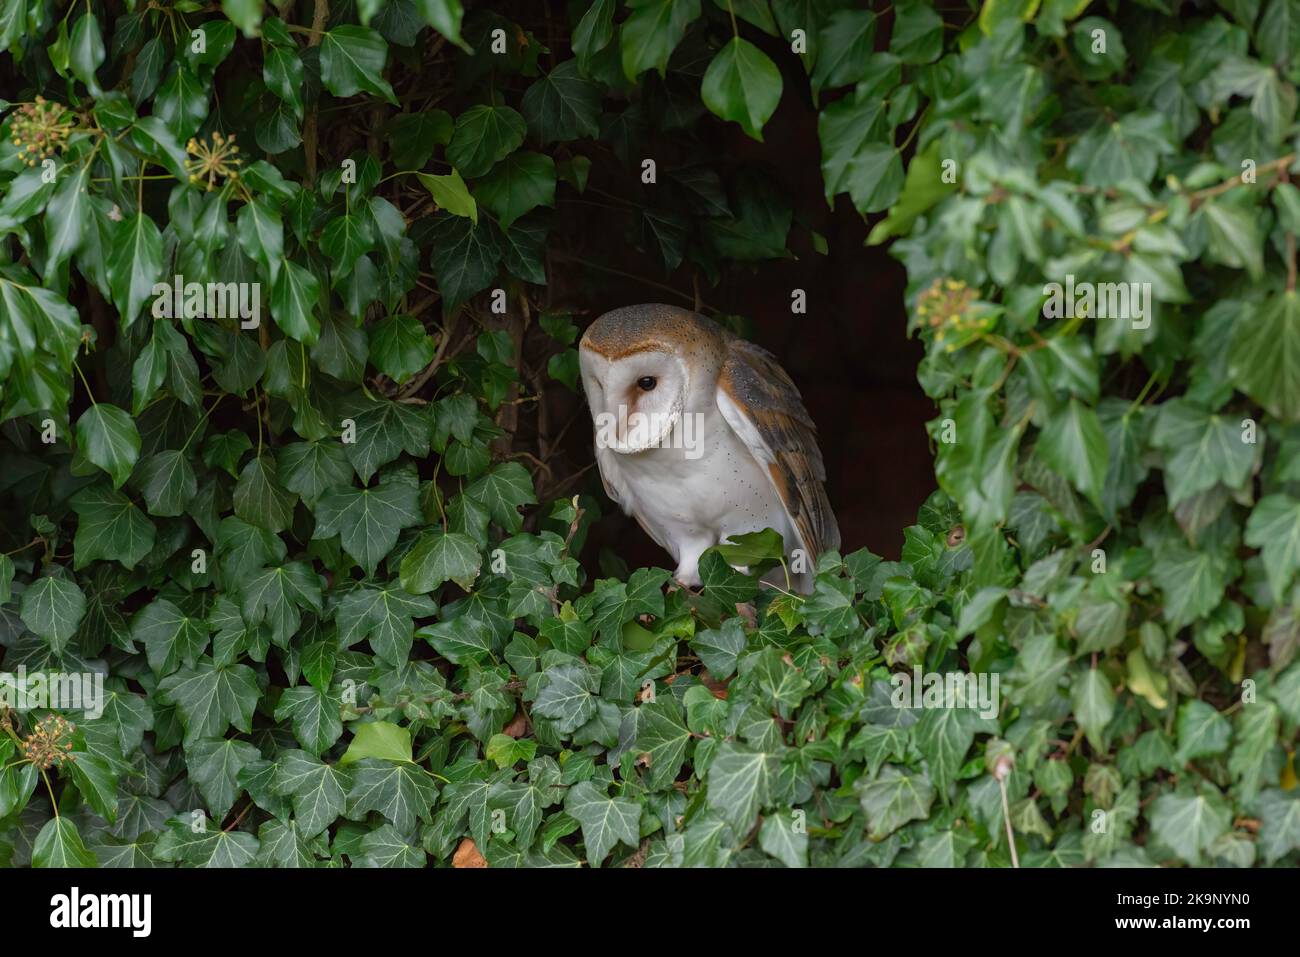 Barn owl, Tyto Alba, captured in a window surrounded by ivy Stock Photo